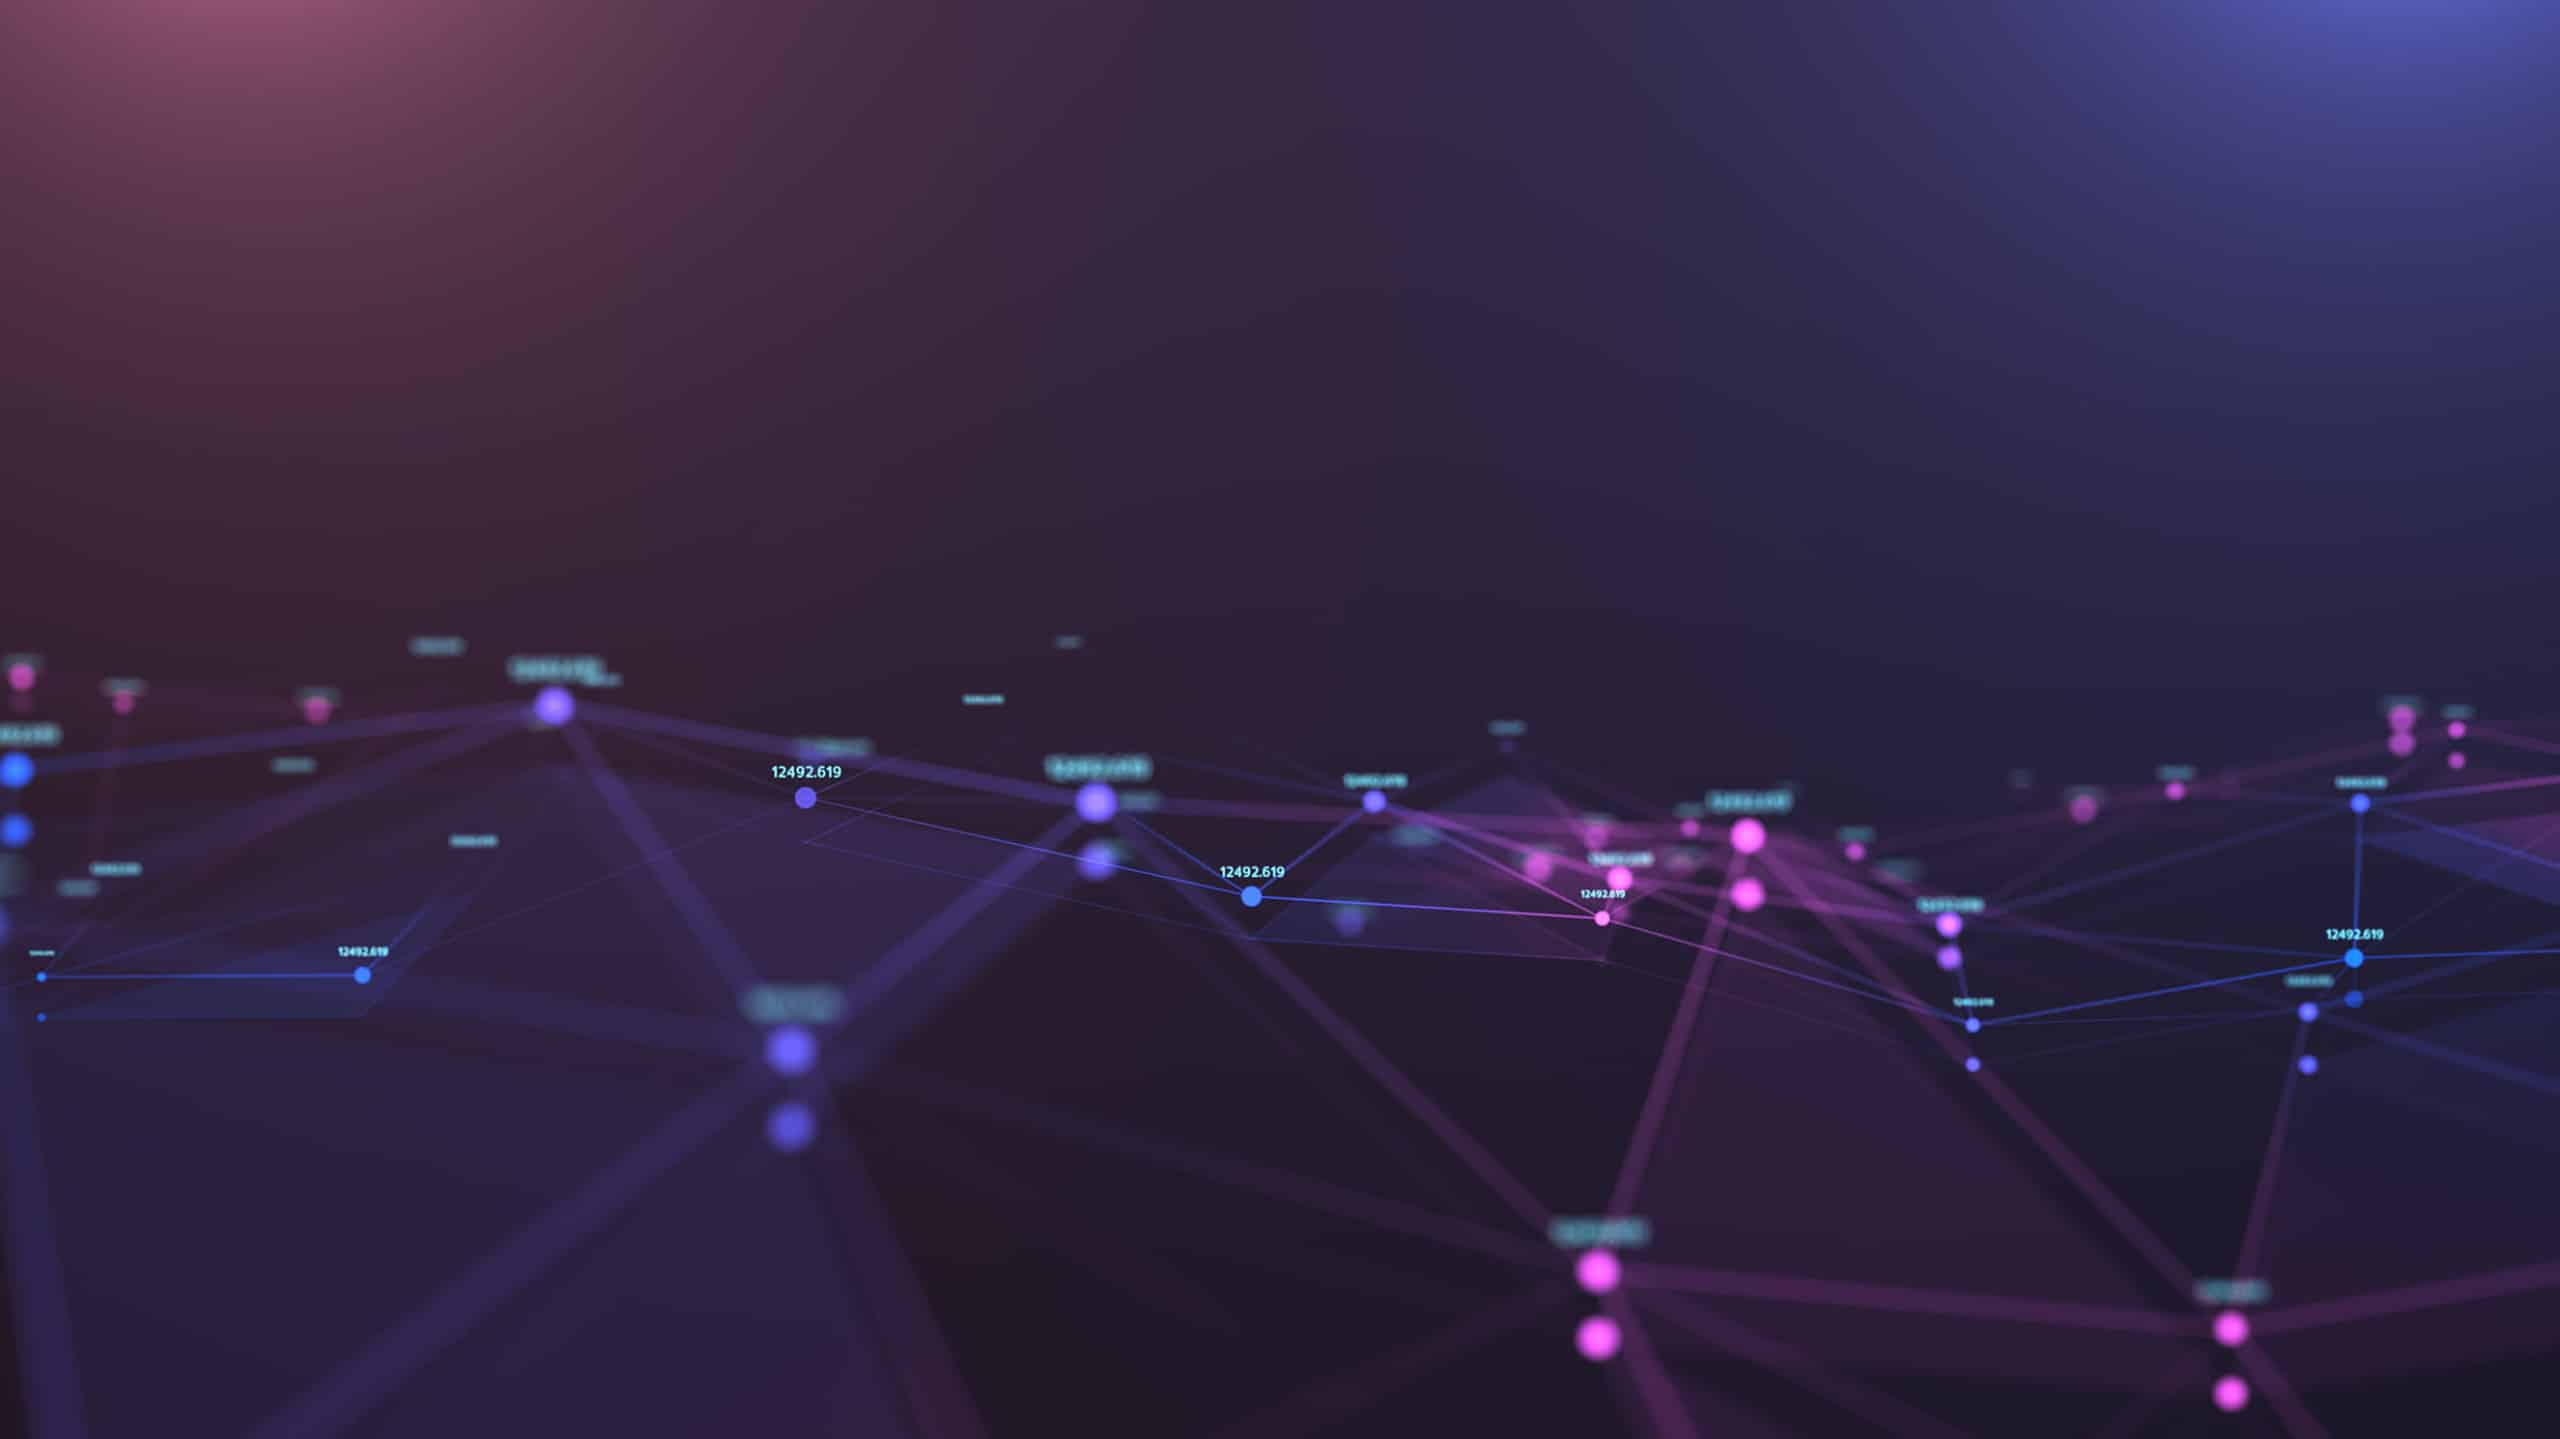 Abstract digital network with nodes connected by lines on a dark blue and purple gradient background, representing a concept of connectivity, data transfer, or technology infrastructure.